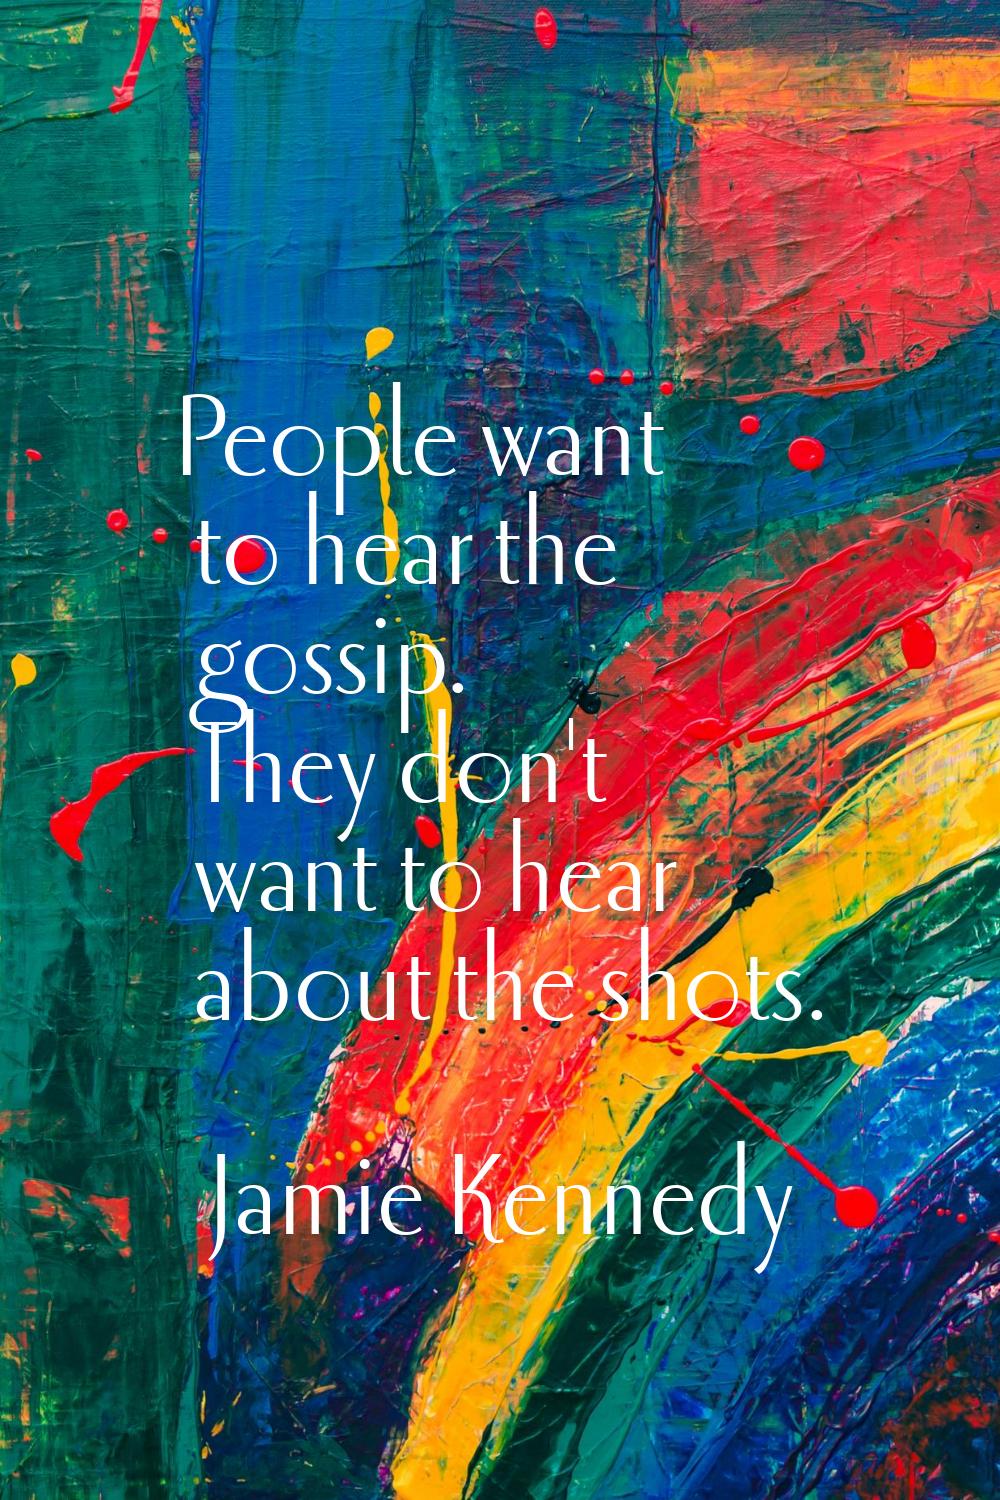 People want to hear the gossip. They don't want to hear about the shots.